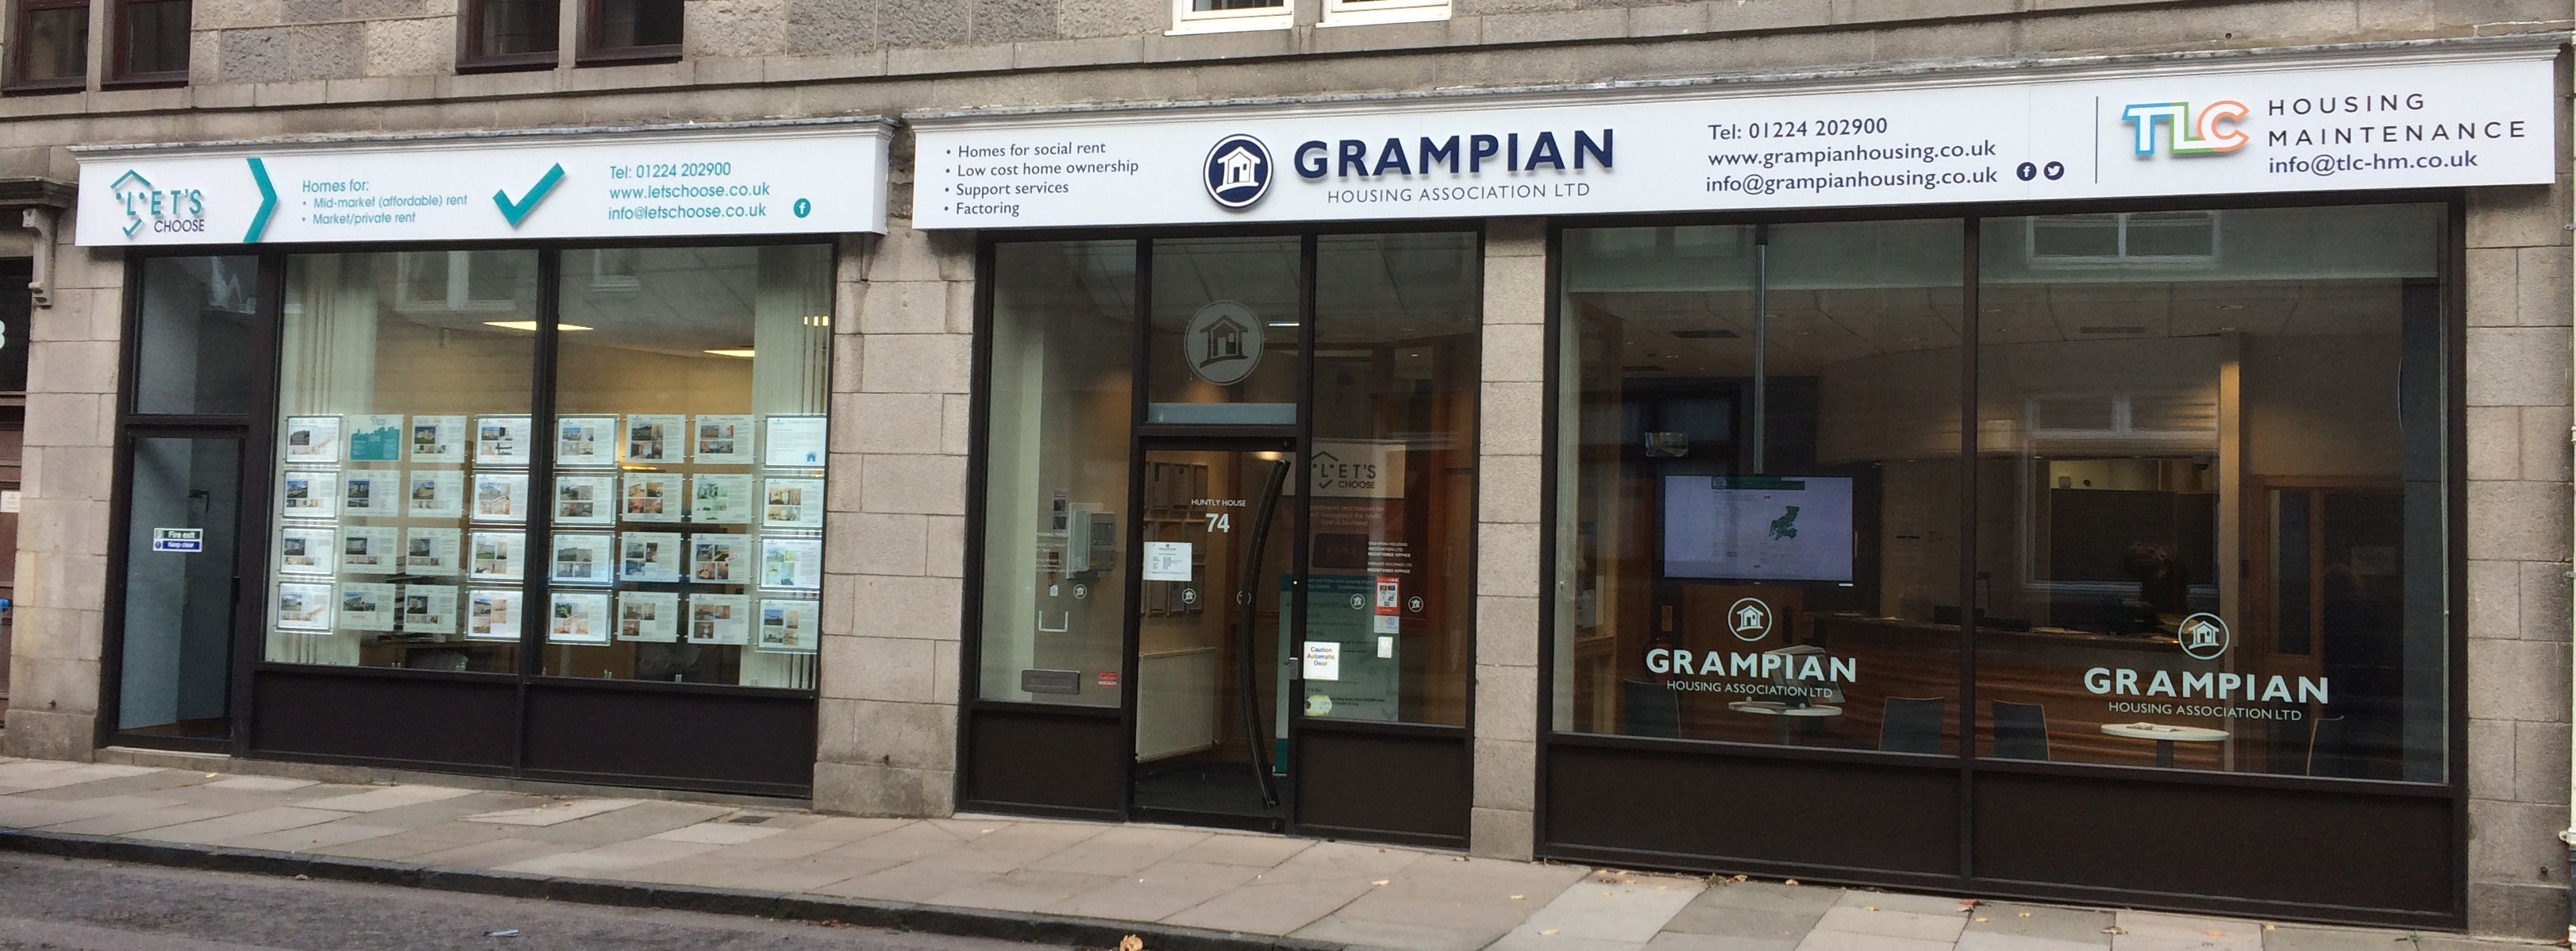 Grampian Housing Association subsidiary delivering high satisfaction